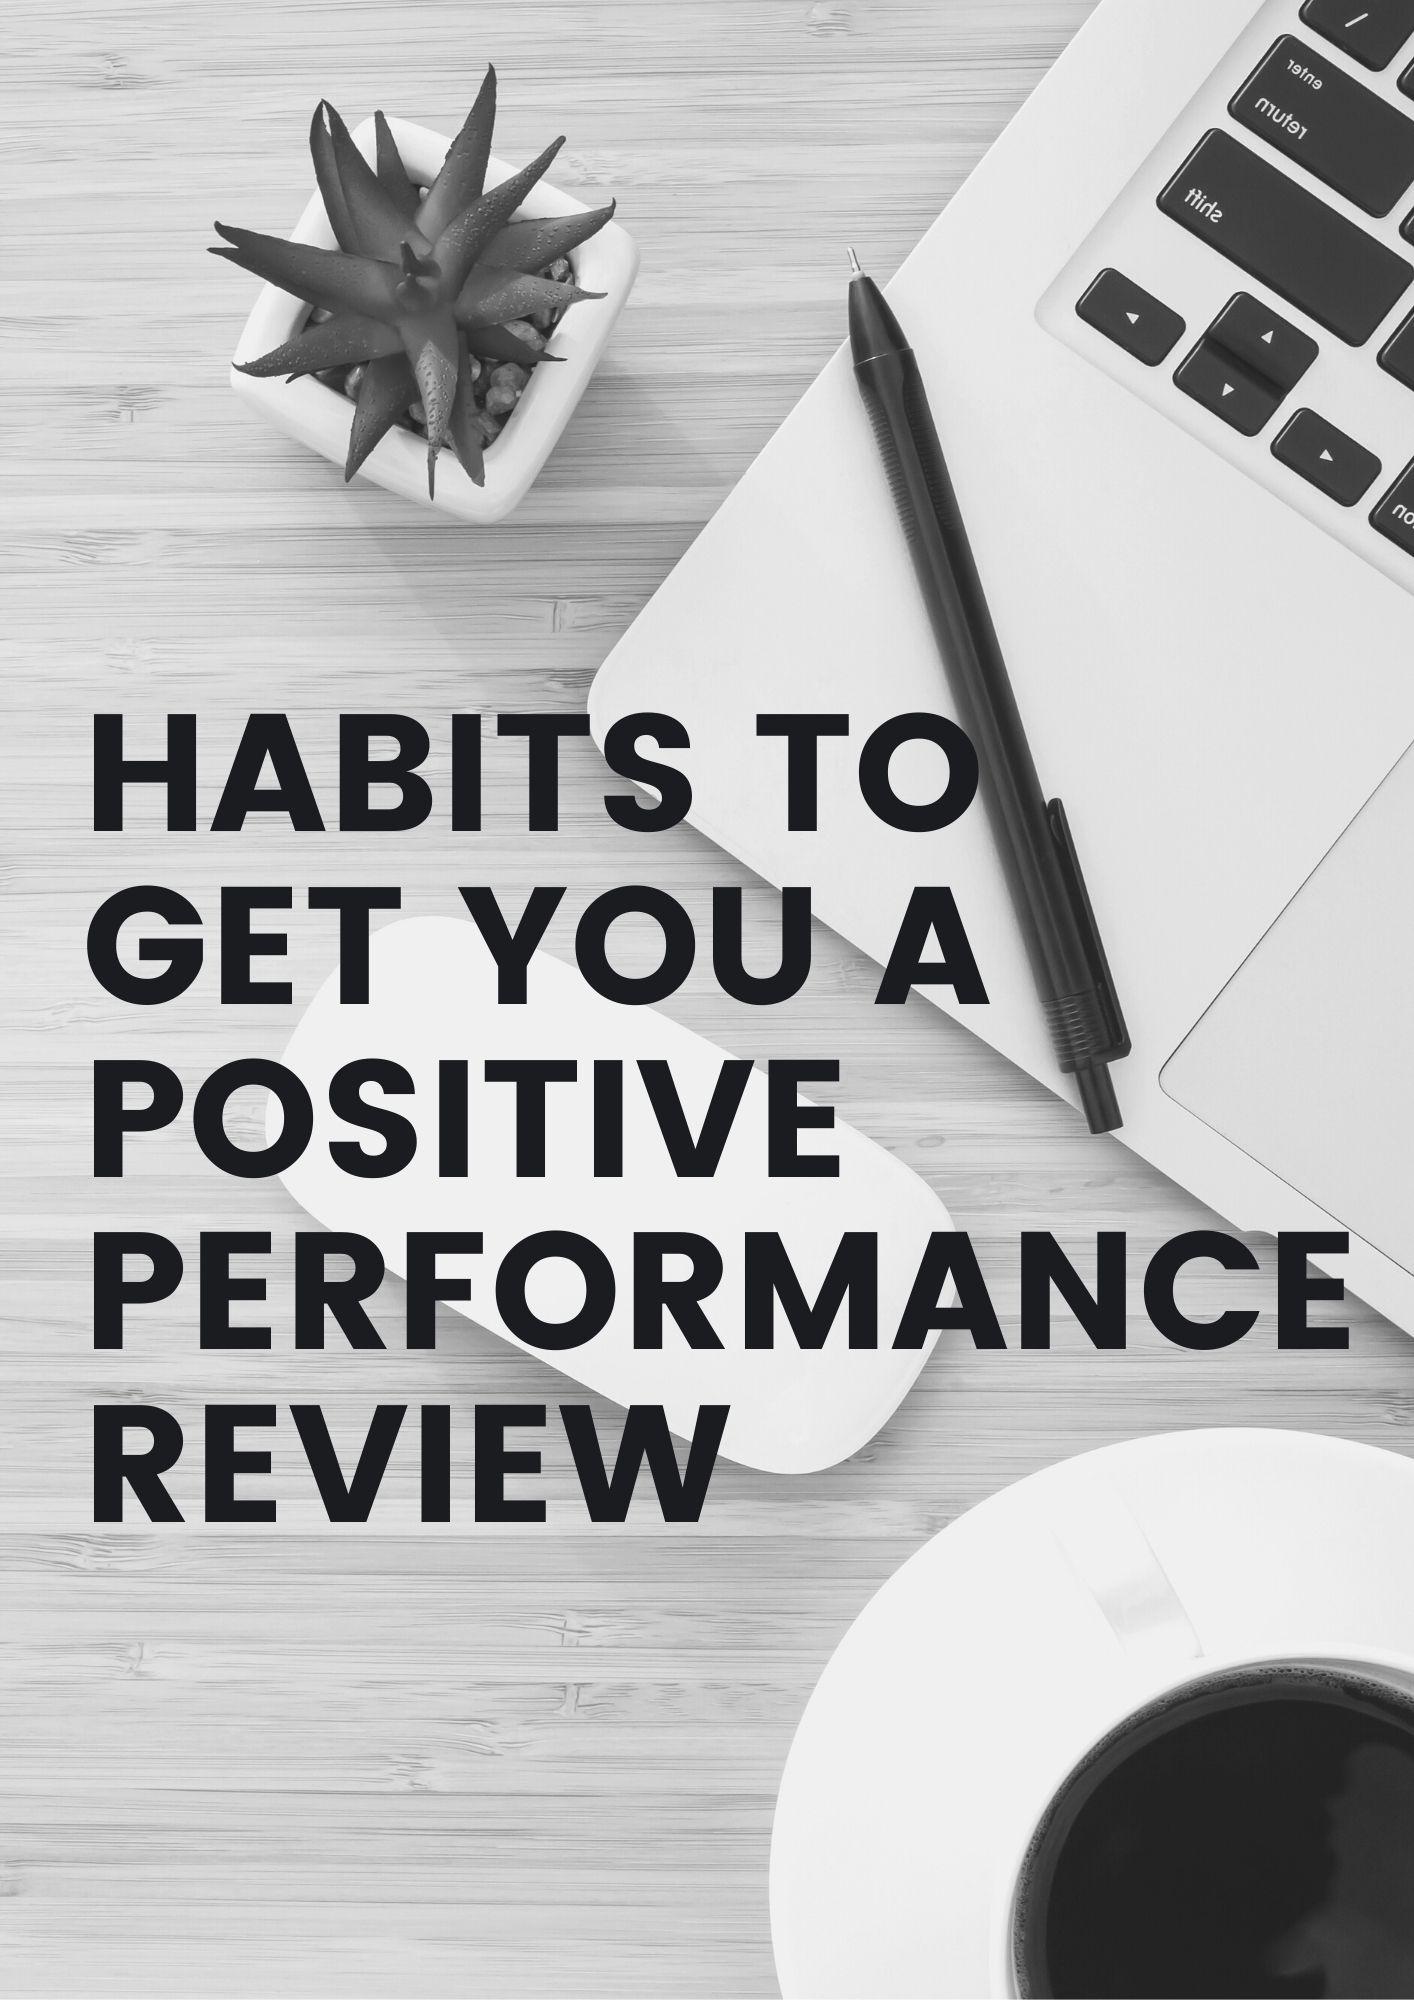 6 Simple & Guaranteed Secrets & Tips to Get Positive Performance Review